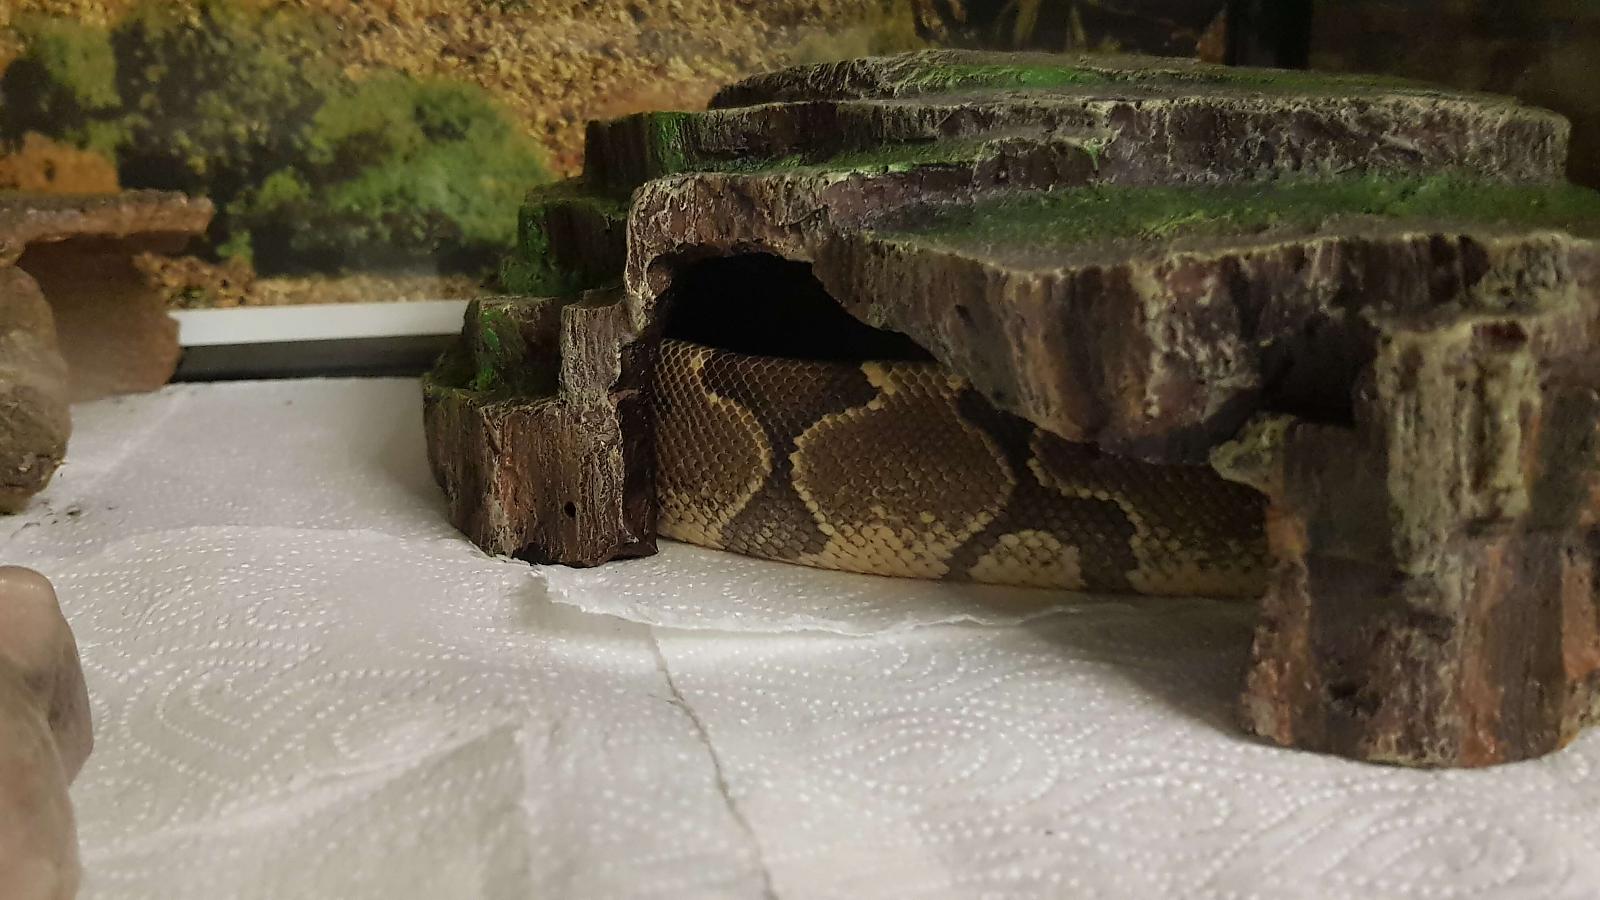 Going into shed?